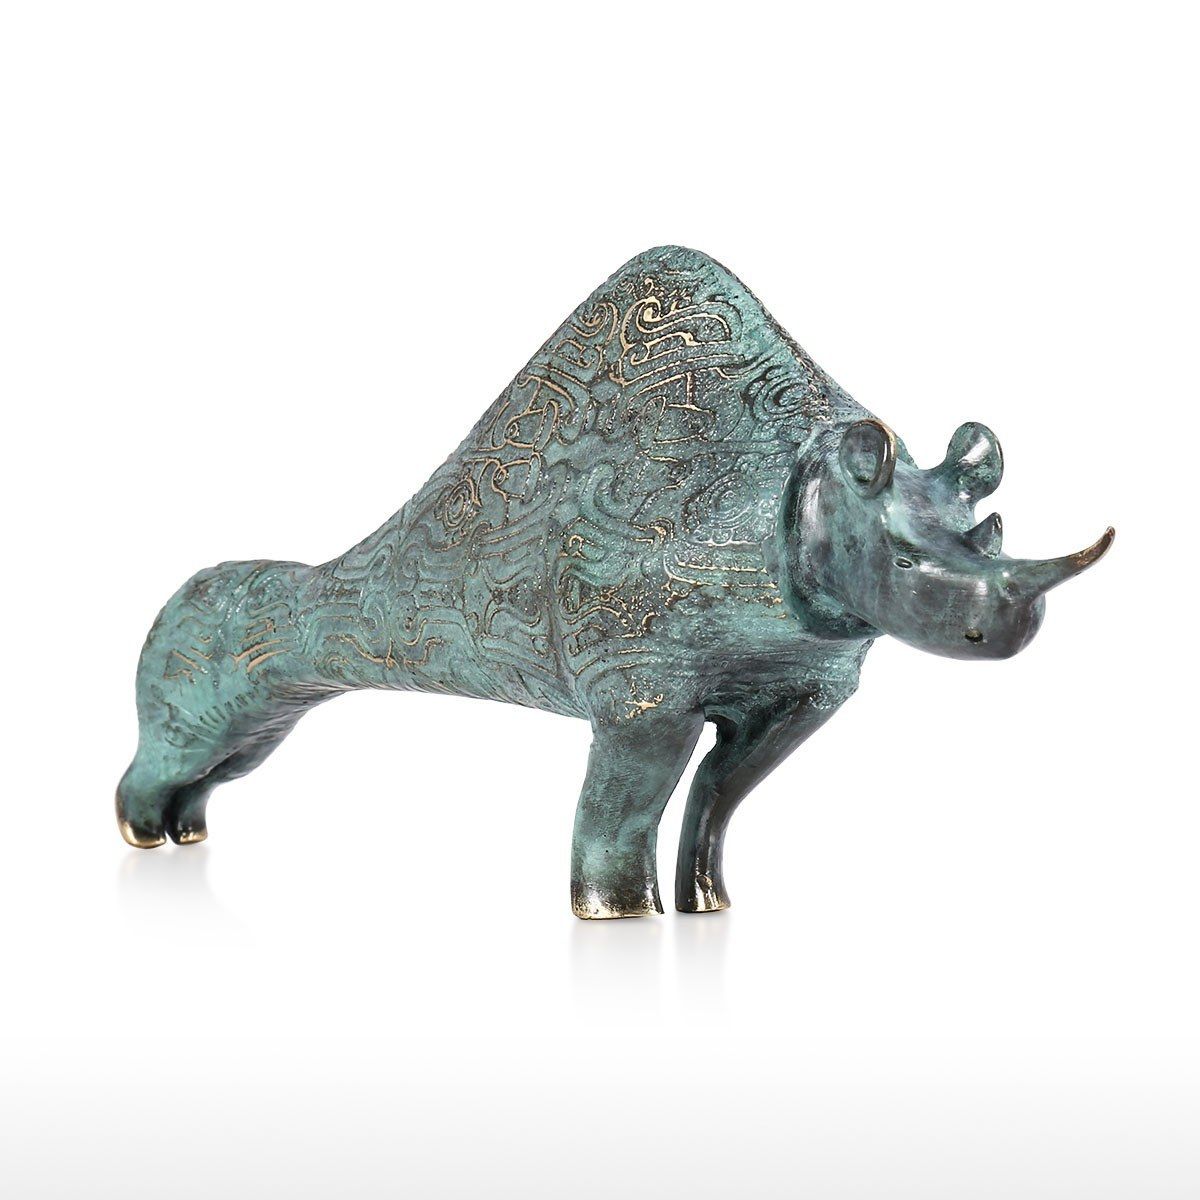 Rhinoceros Statue and Rhinoceros Gifts for Home Decor and Living Room Ideas